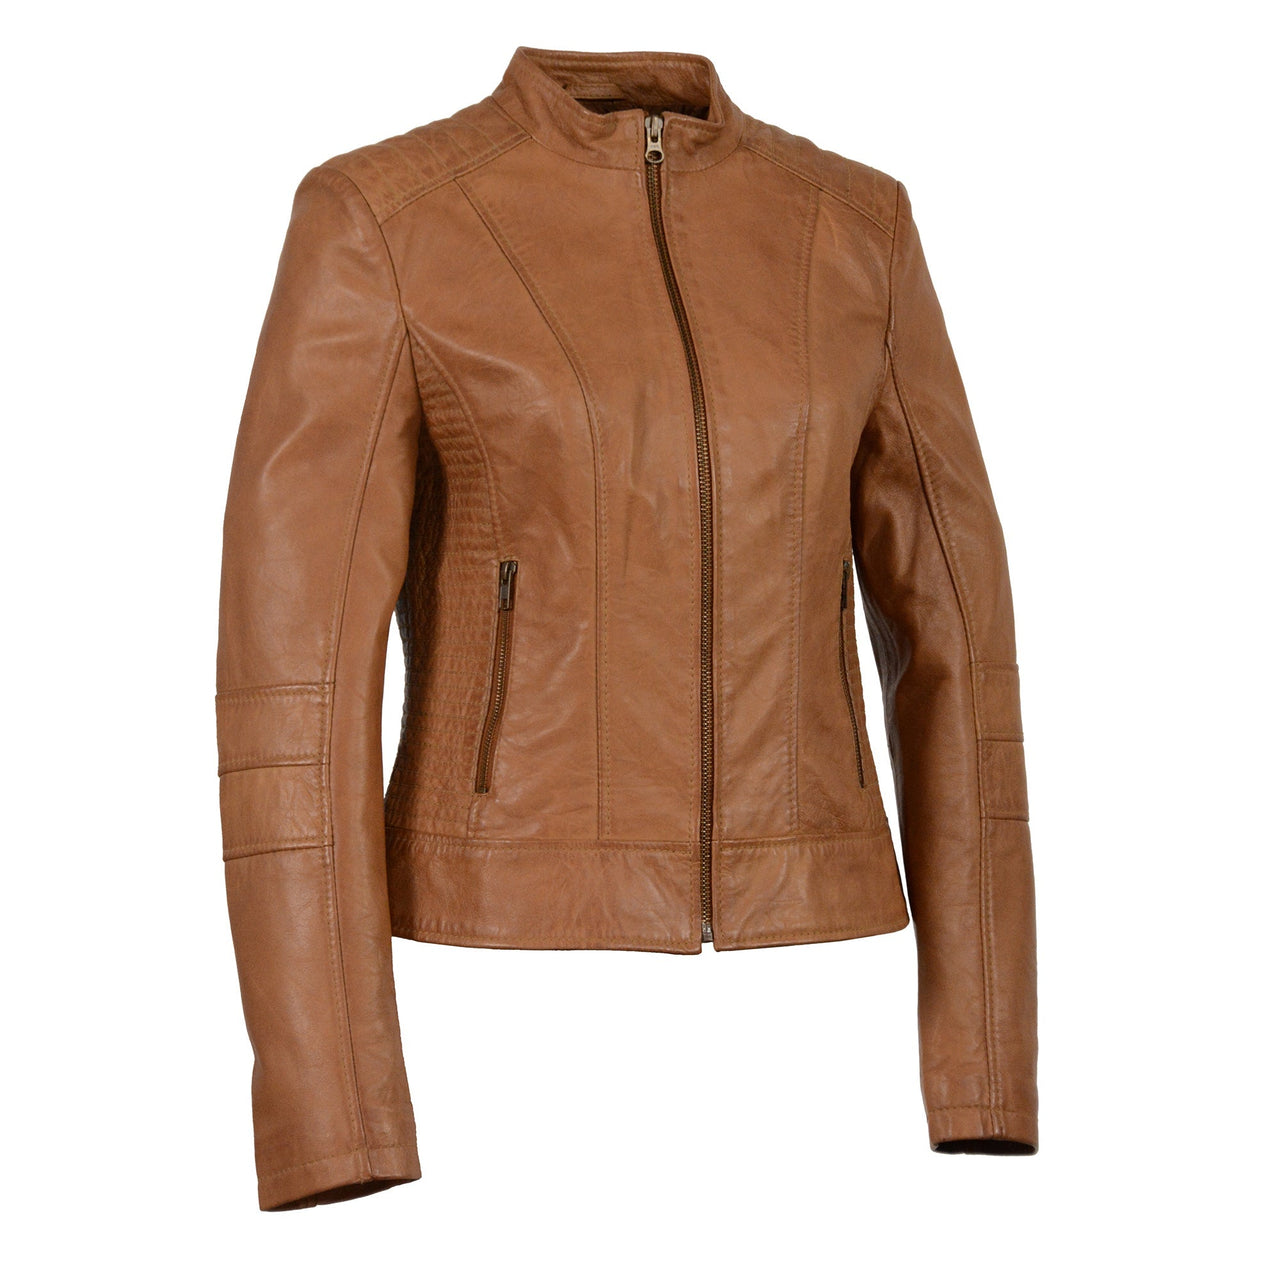 Woman's Zip Front Stand Up Collar Scuba Jacket - HighwayLeather